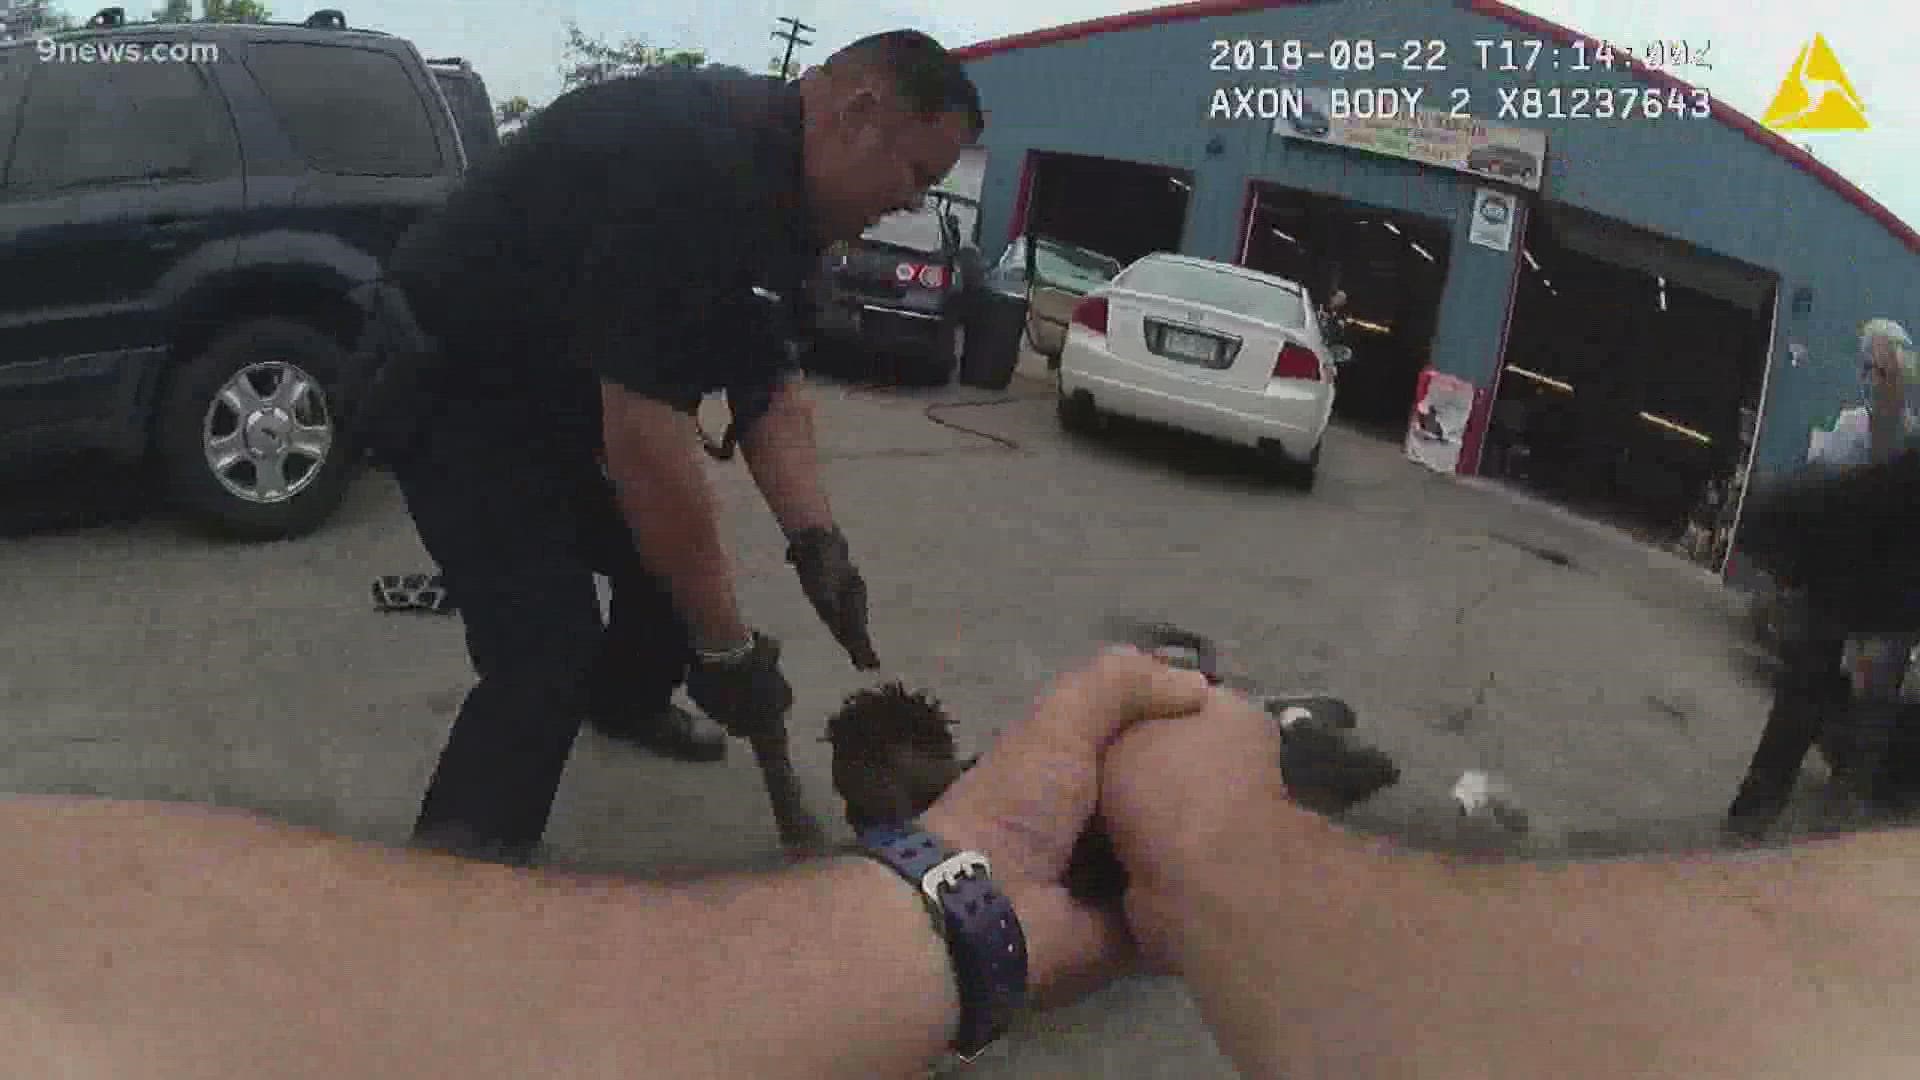 Malow Mayek sued the city last year, saying Denver officers violated his civil rights when they used a baton and Taser on him in 2018.